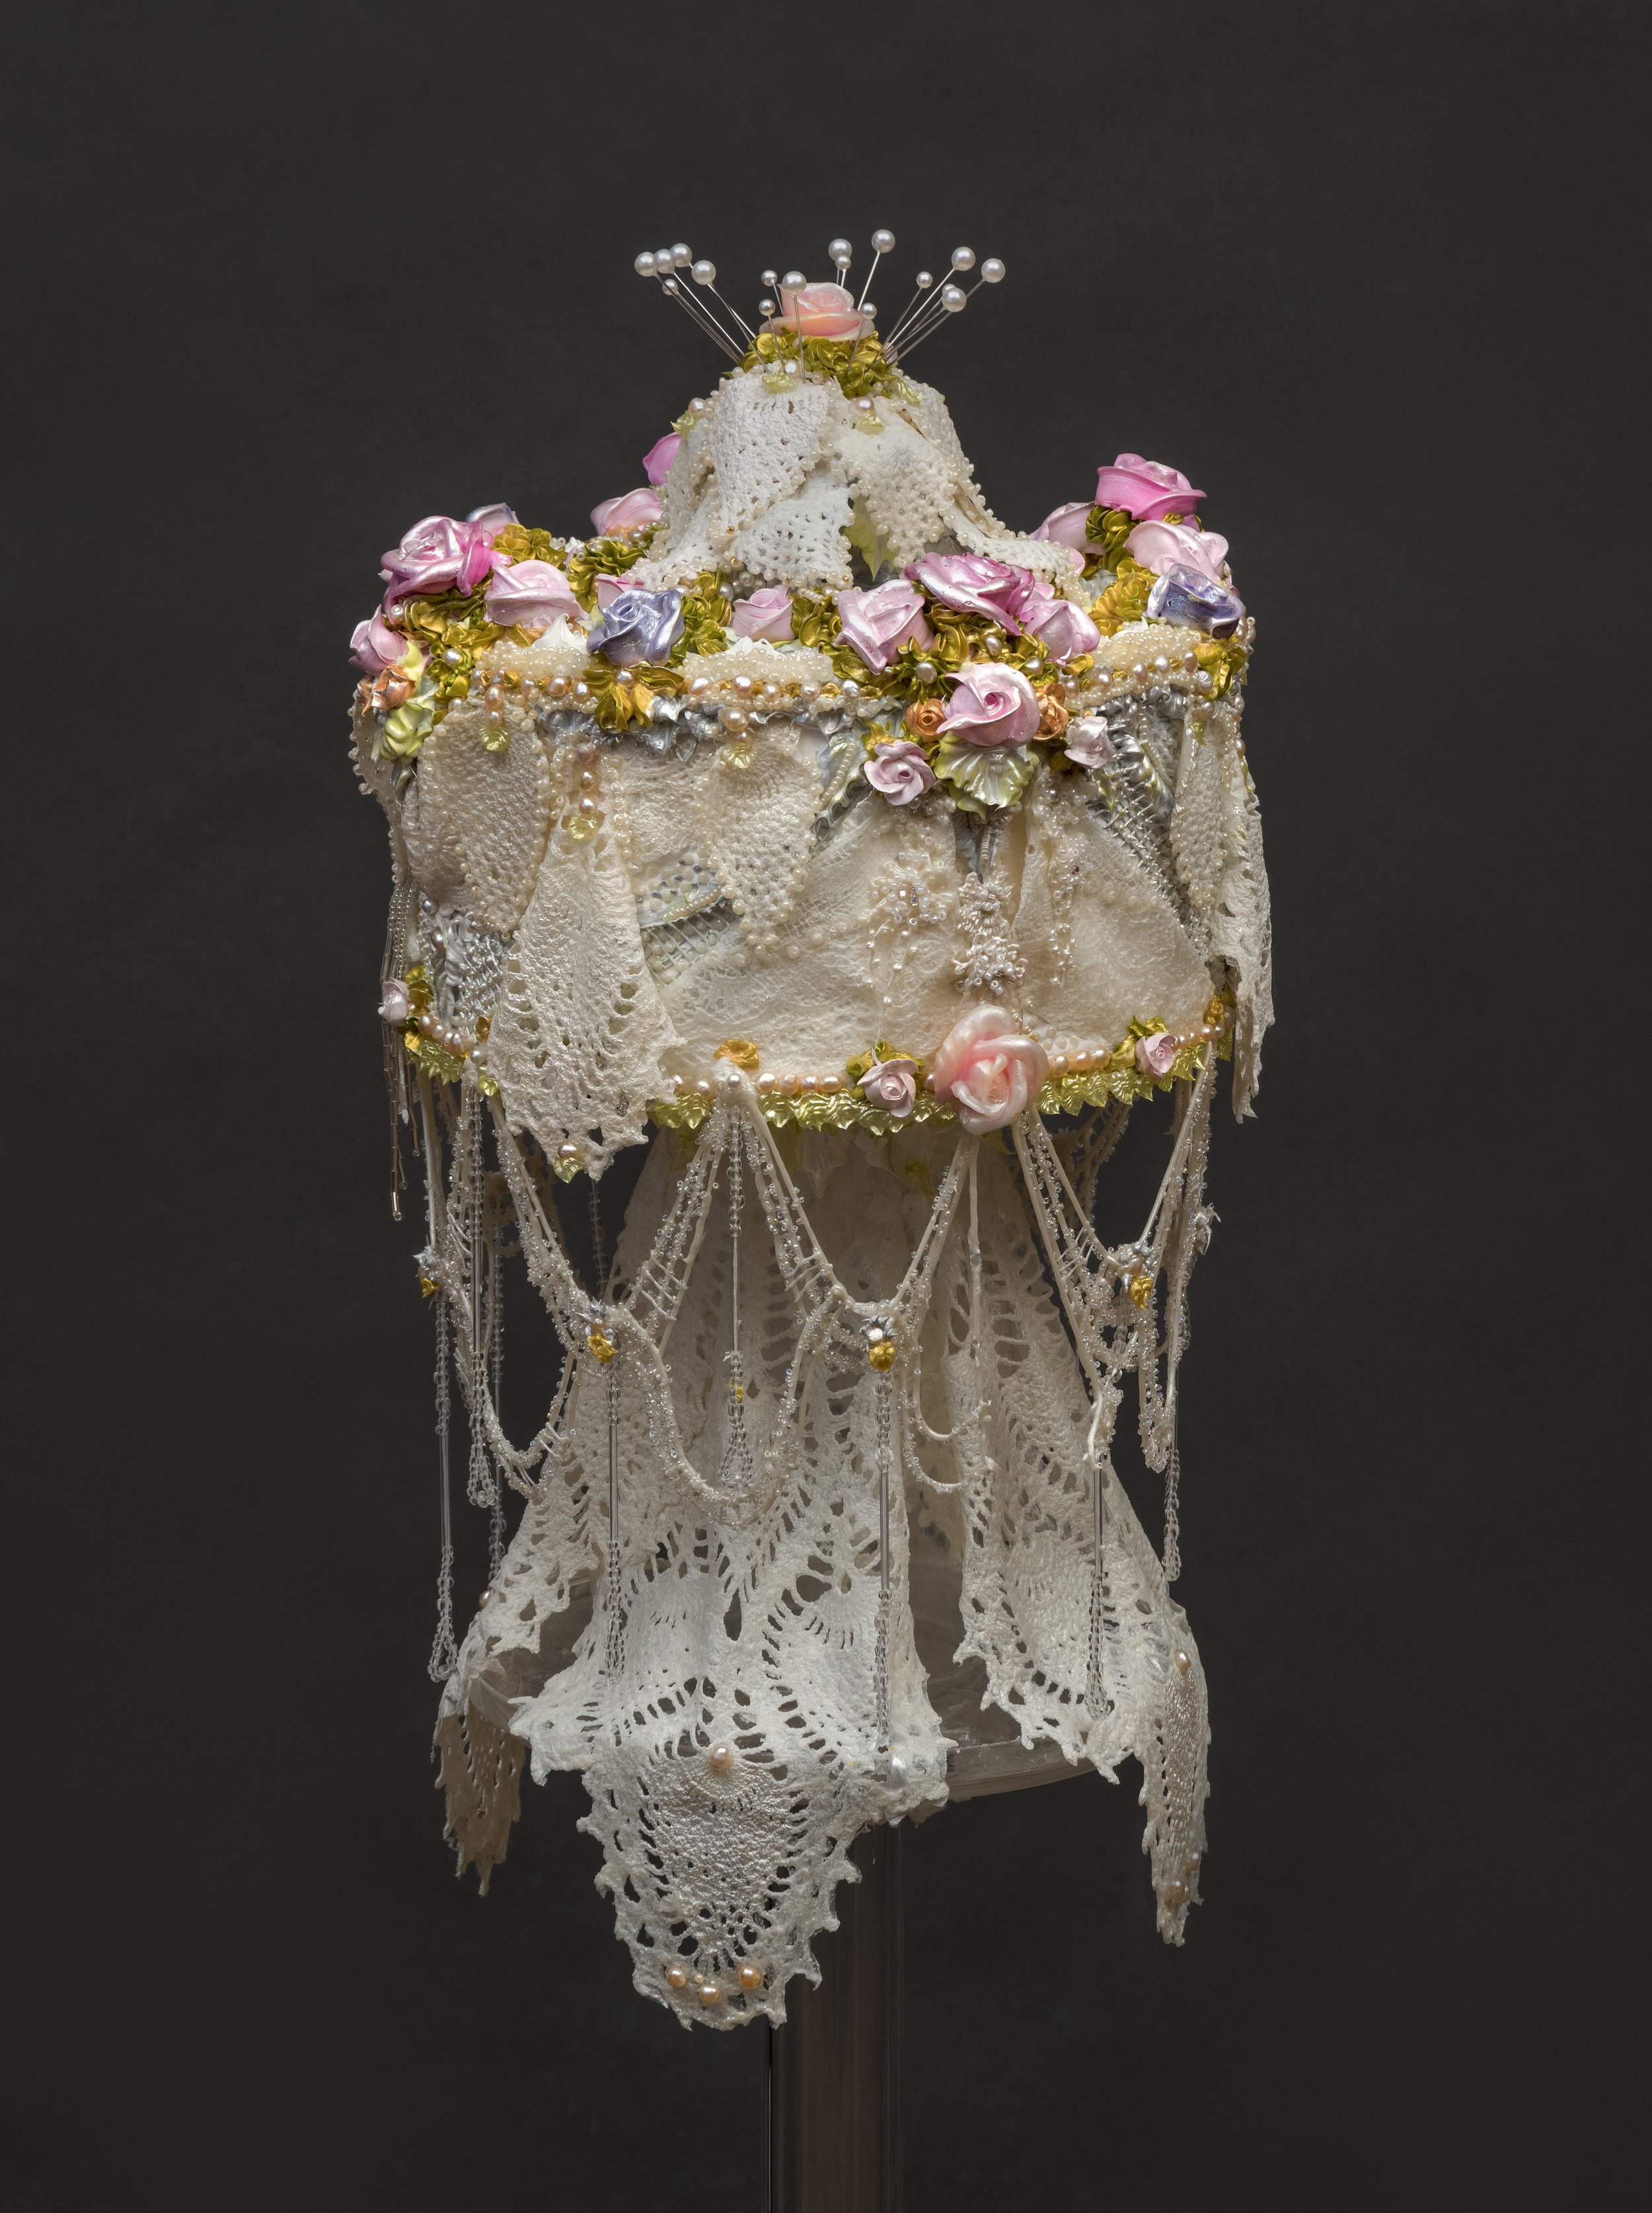 Pat Lasch &lt;alt: Cake decorated with pink roses, gold and silver piping, pearls, pins, and draped in white lace &lt;/&gt;